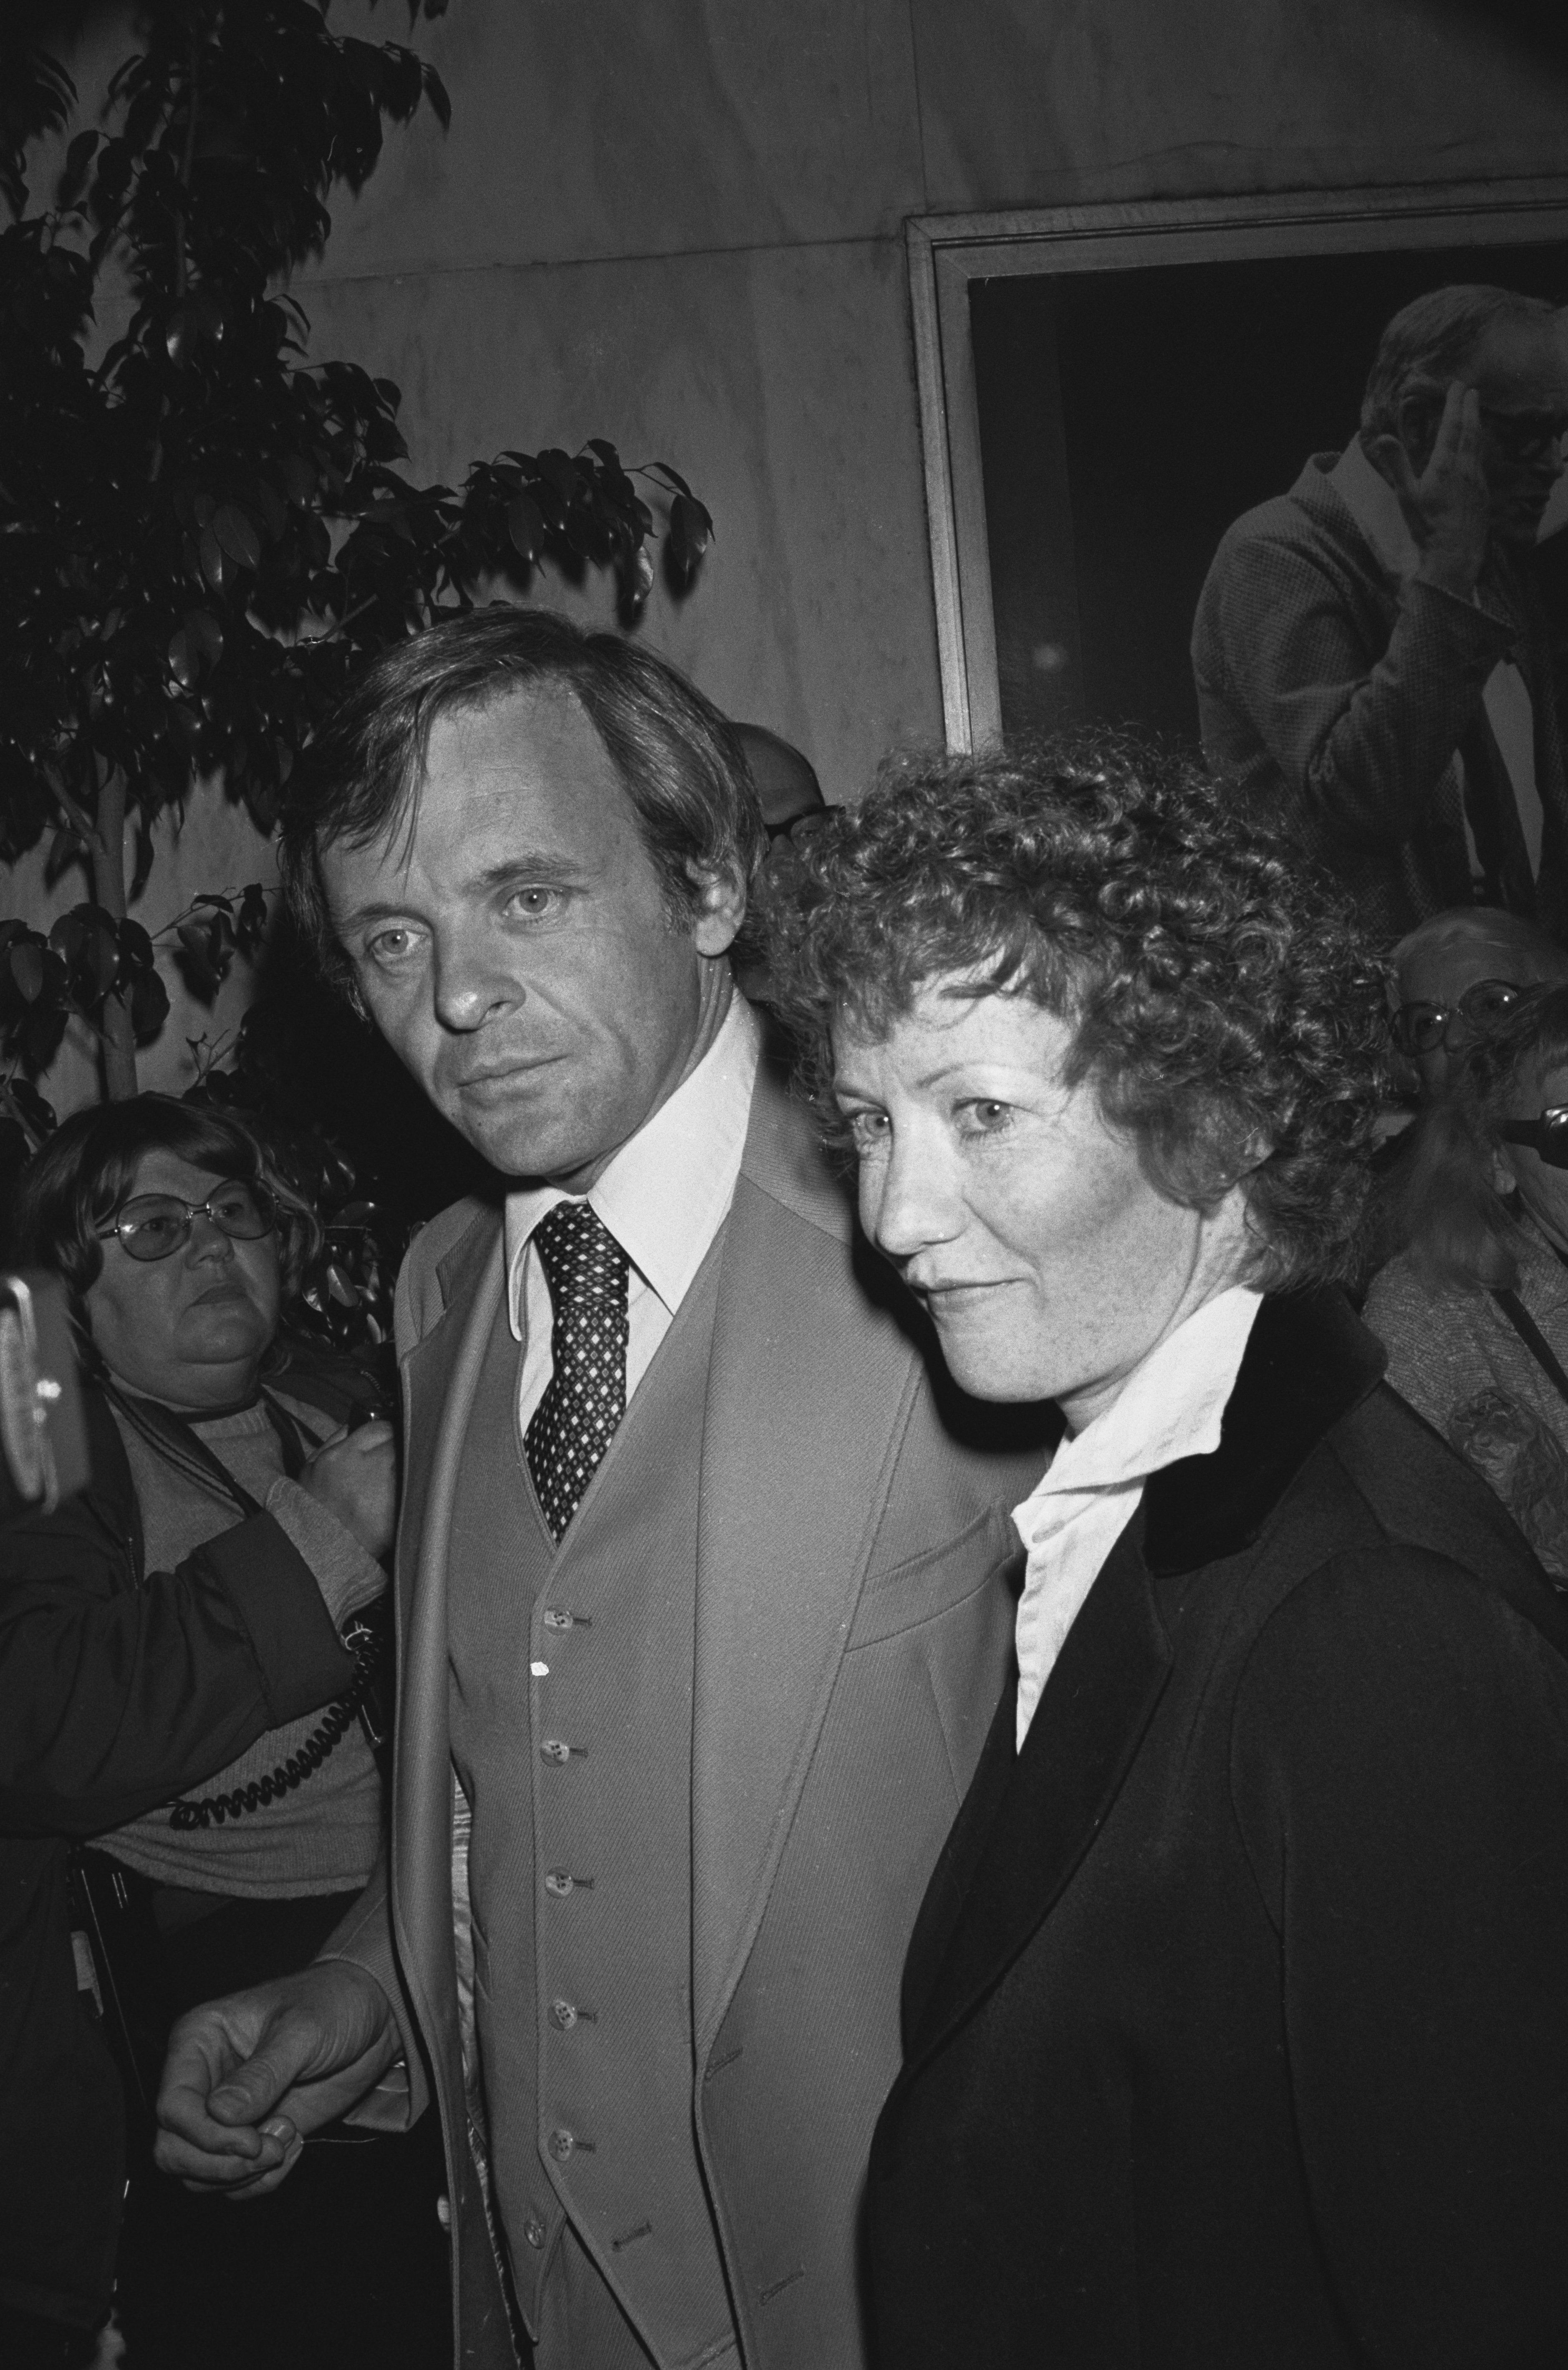 Anthony Hopkins and Jennifer Lynton at an unspecified event at an unspecified location. | Source: Getty Images